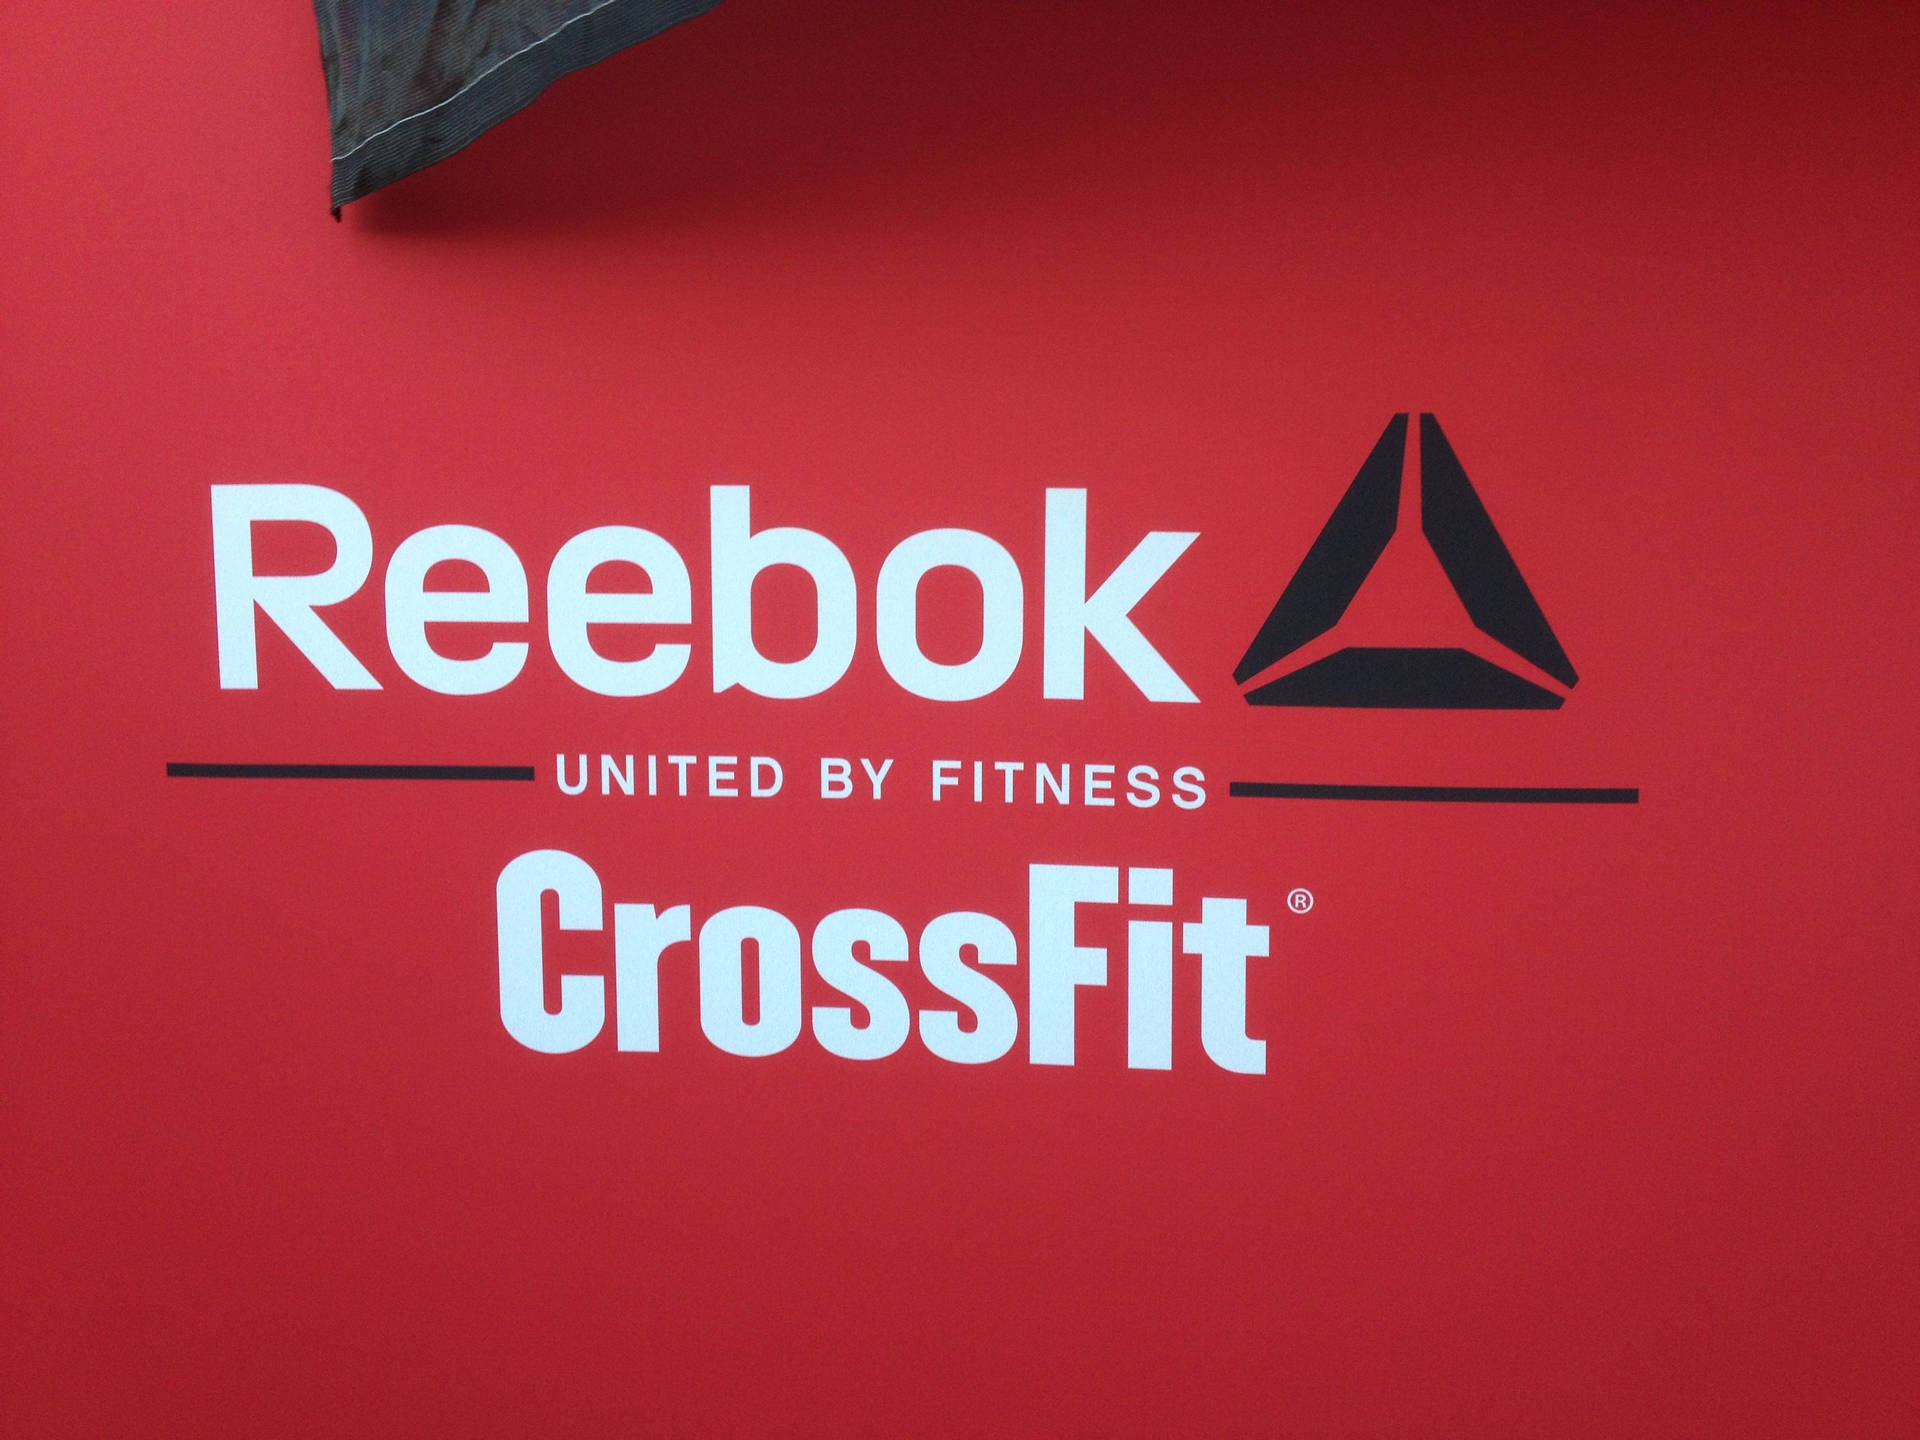 Reebok Crossfit United By Fitness Background